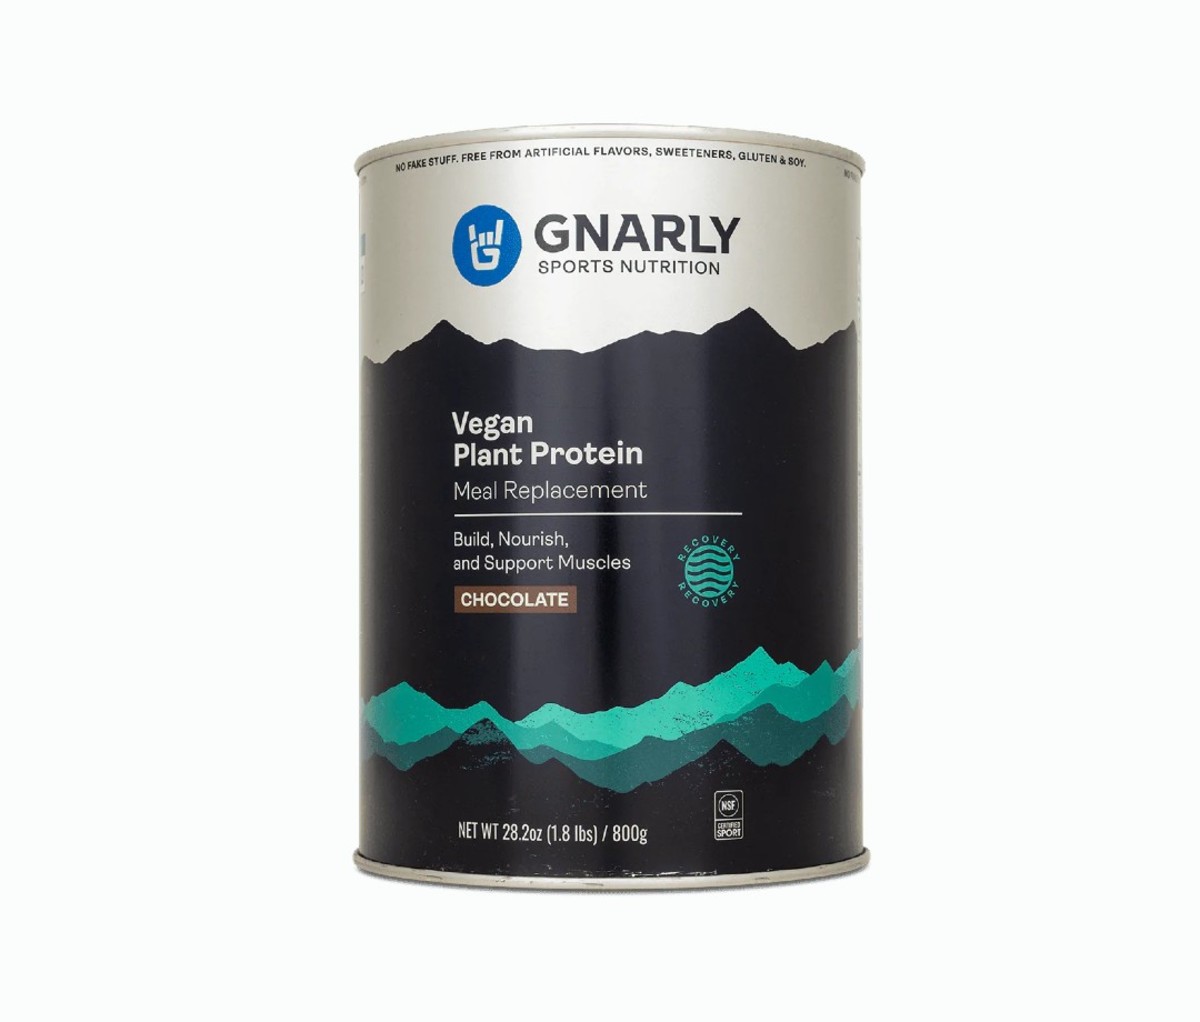 Gnarly Vegan supplement being scooped out of a container outside.